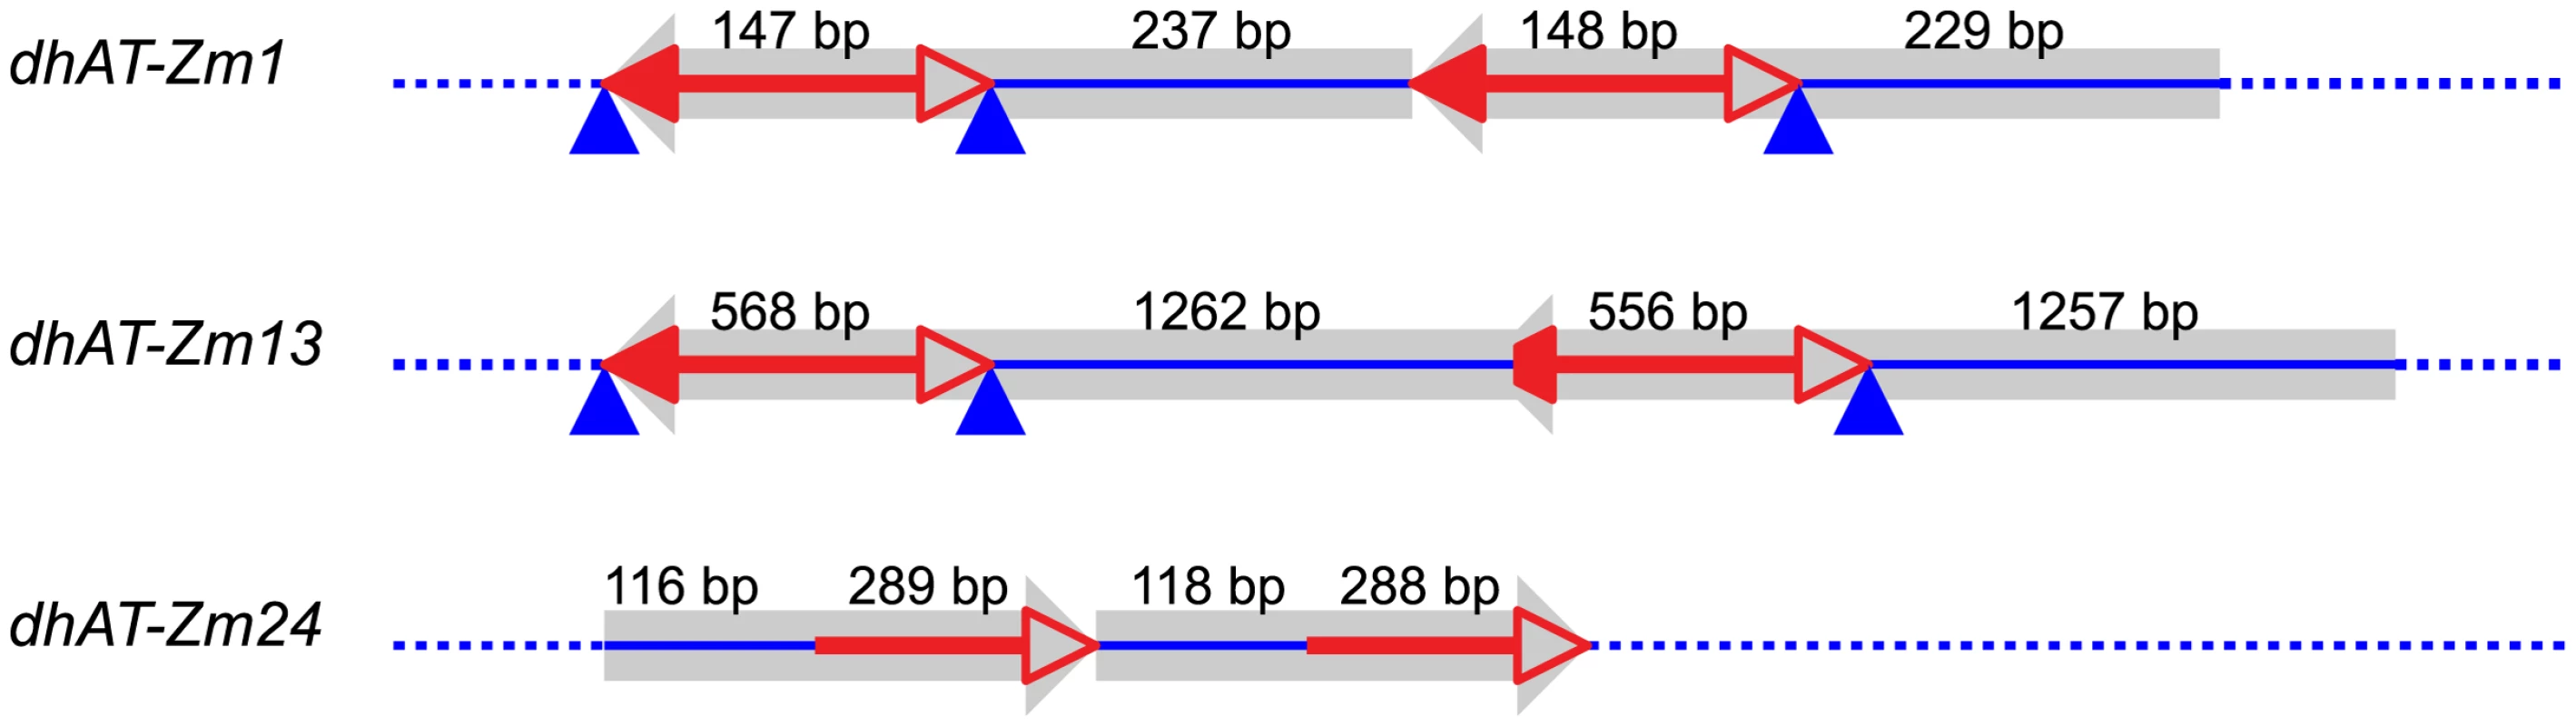 Tandem direct duplications in maize generated by Reversed-Ends Transposition.